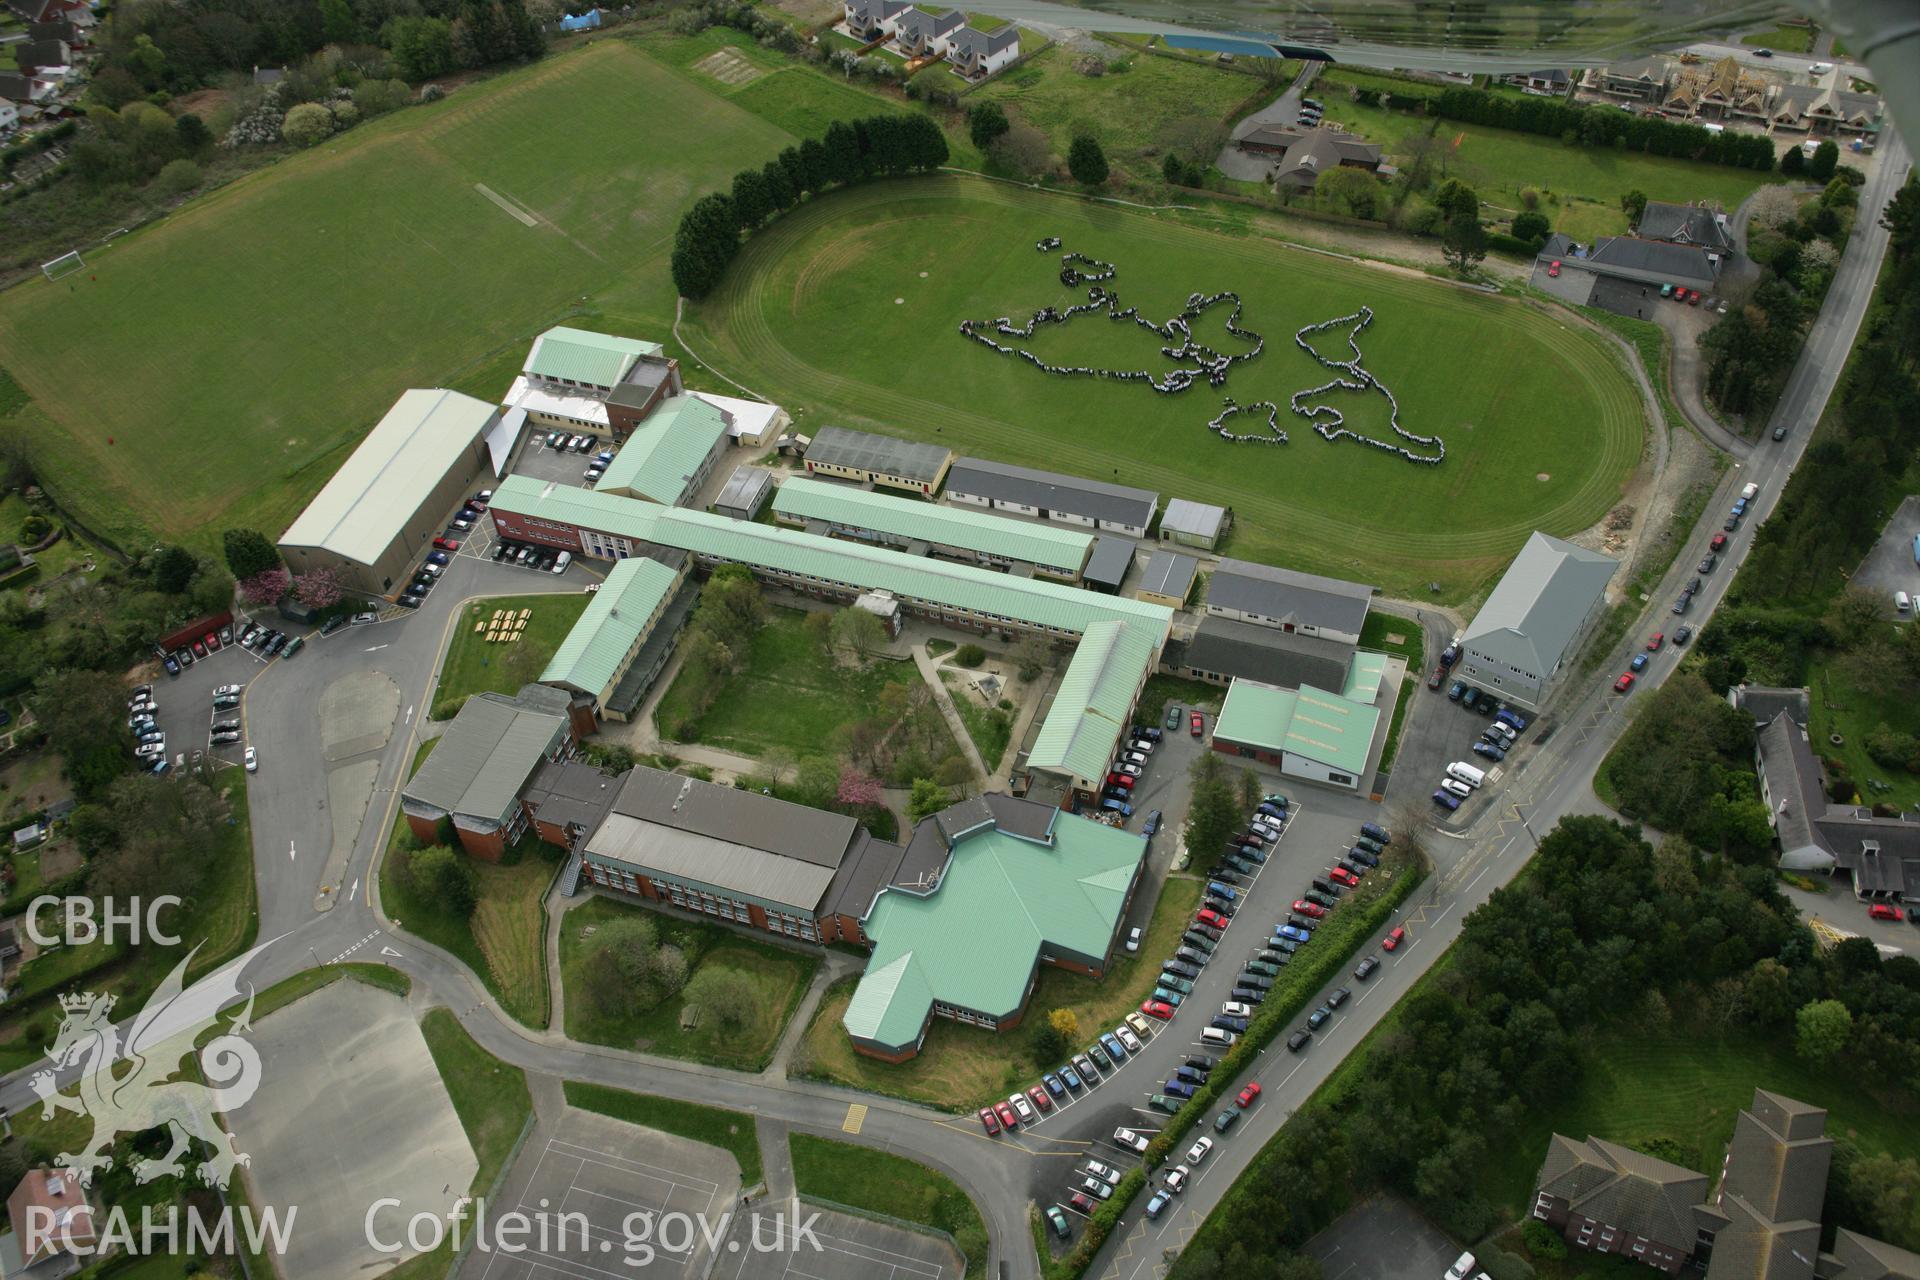 RCAHMW colour oblique aerial photograph of Penglais Comprehensive School, World Map of 1500 pupils. Taken on 17 April 2007 by Toby Driver